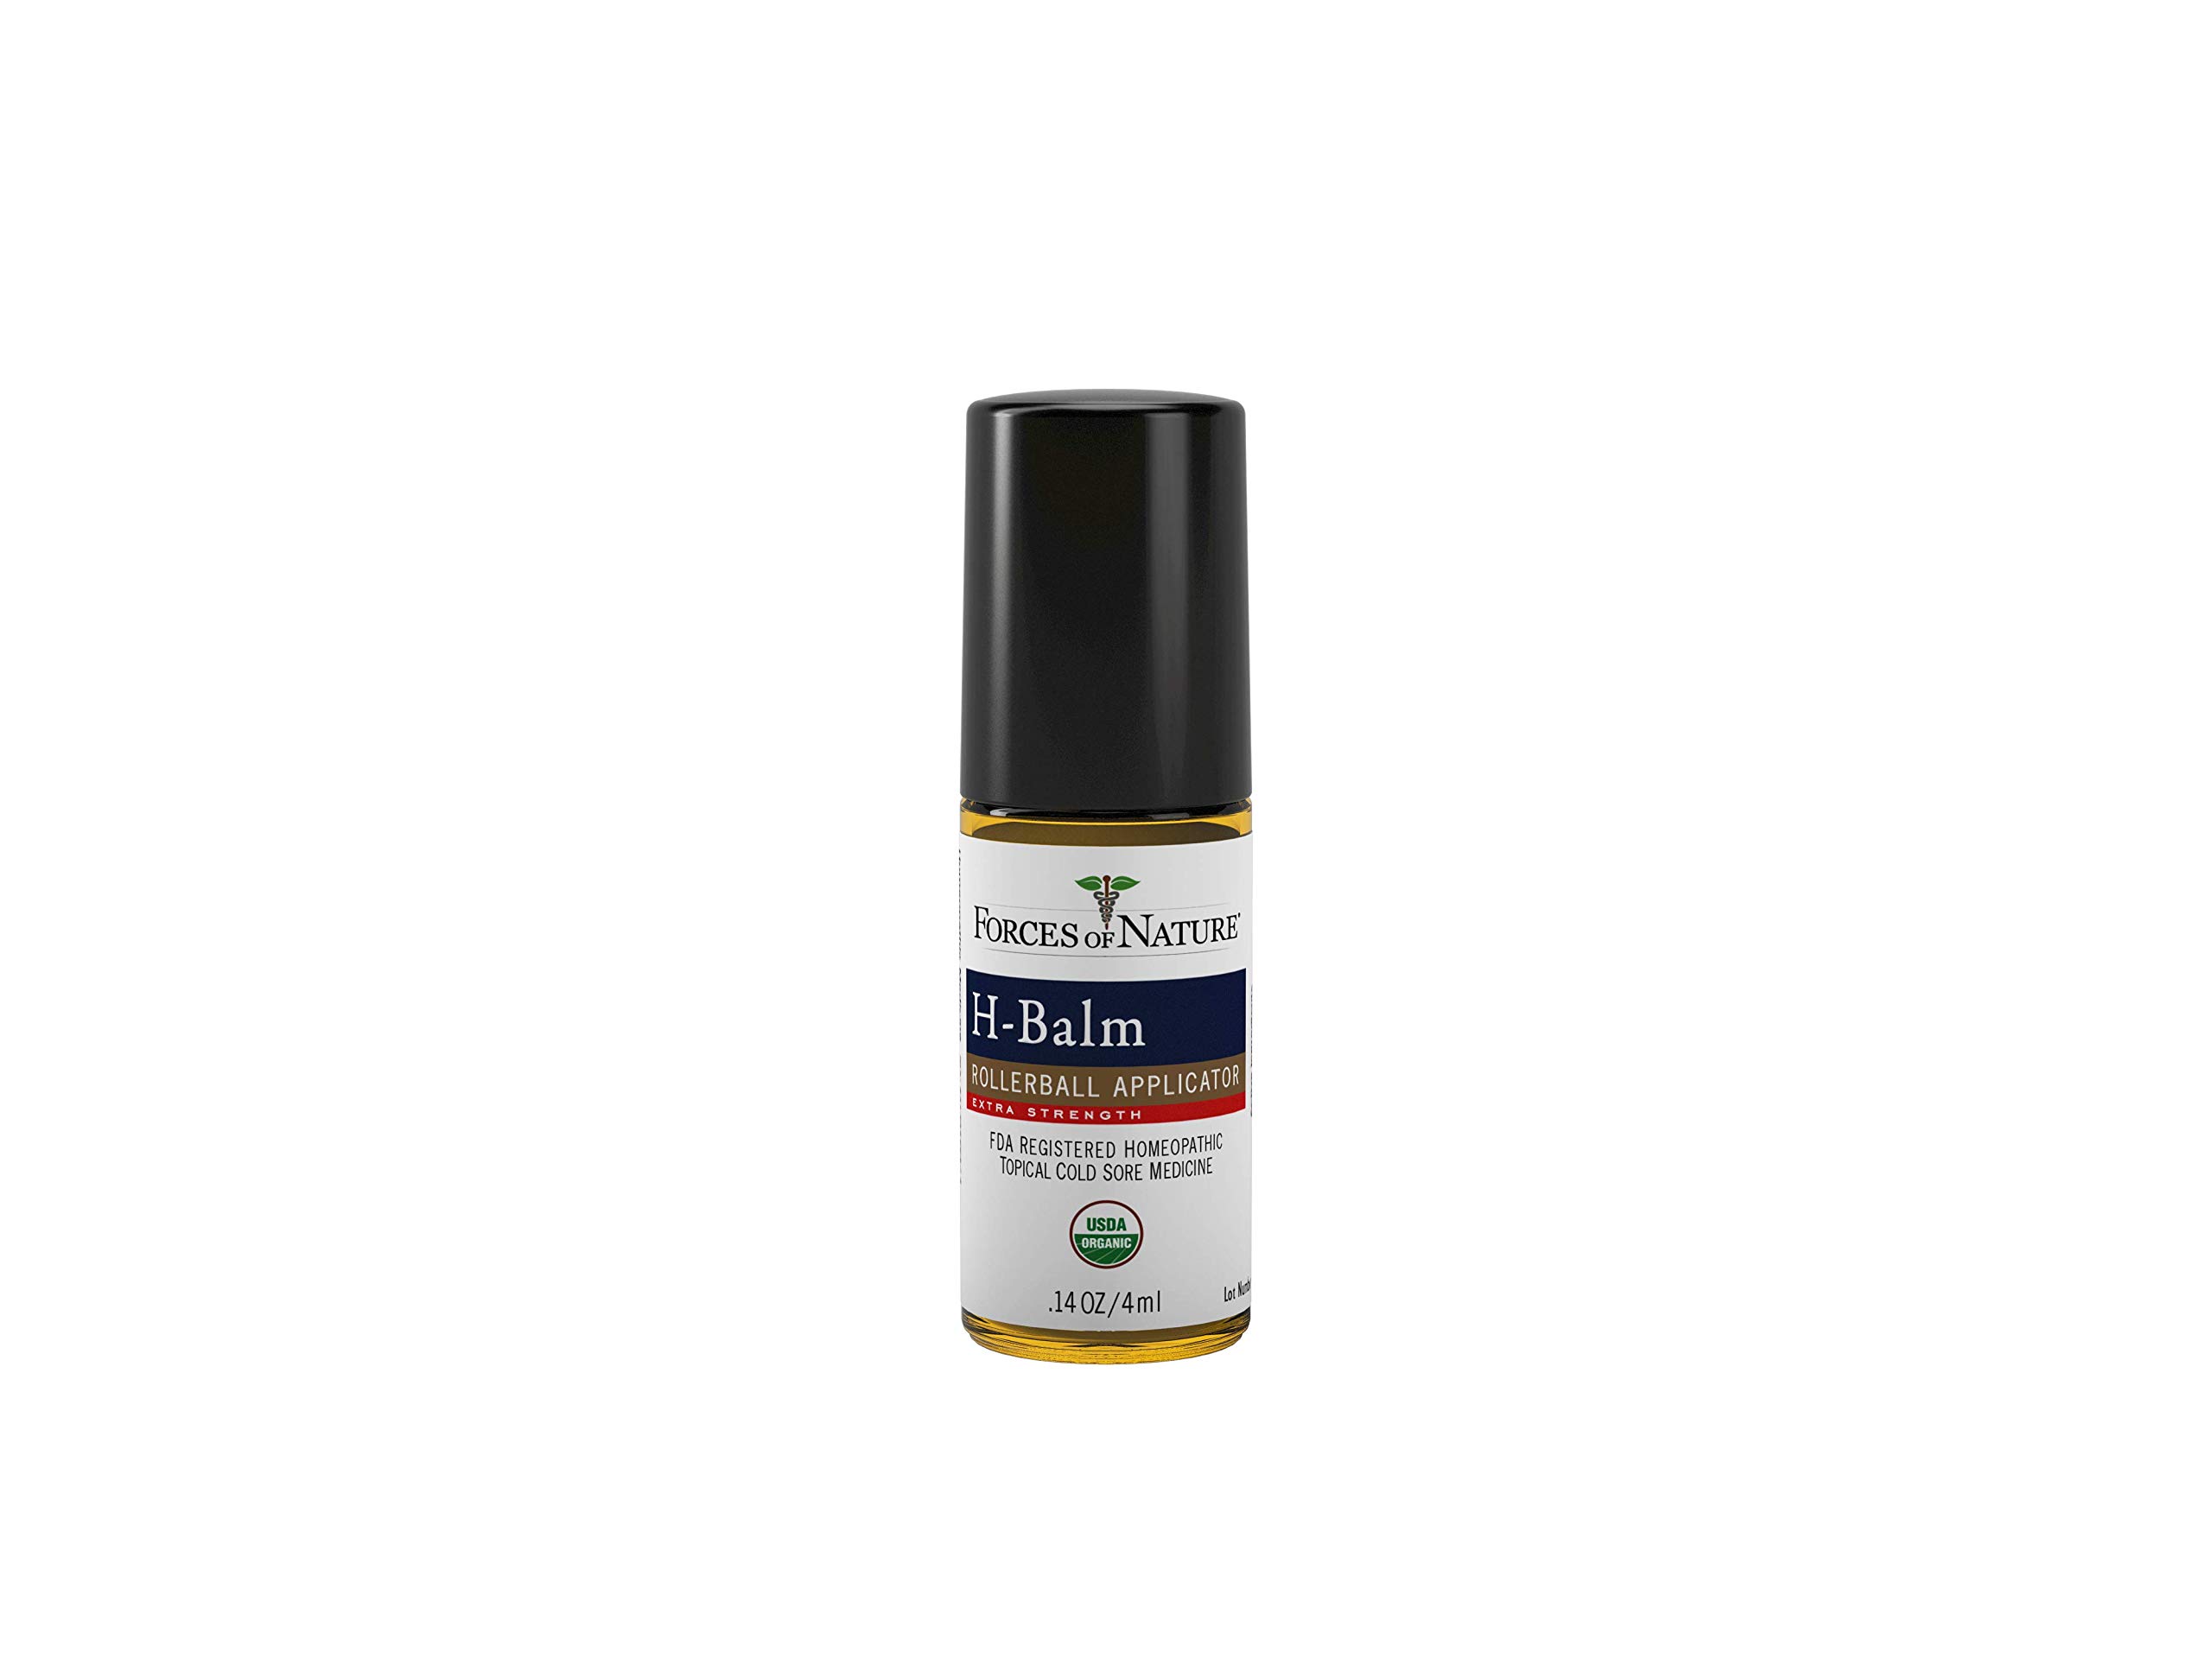 Forces Of Nature – Natural, organic, h-balm Control Extra Strength Cold Sore, fever Blister Treatment (4ml) Non Gmo, No Harmful Chemicals -Fast Relief for Tingling, burning & Itching Pain